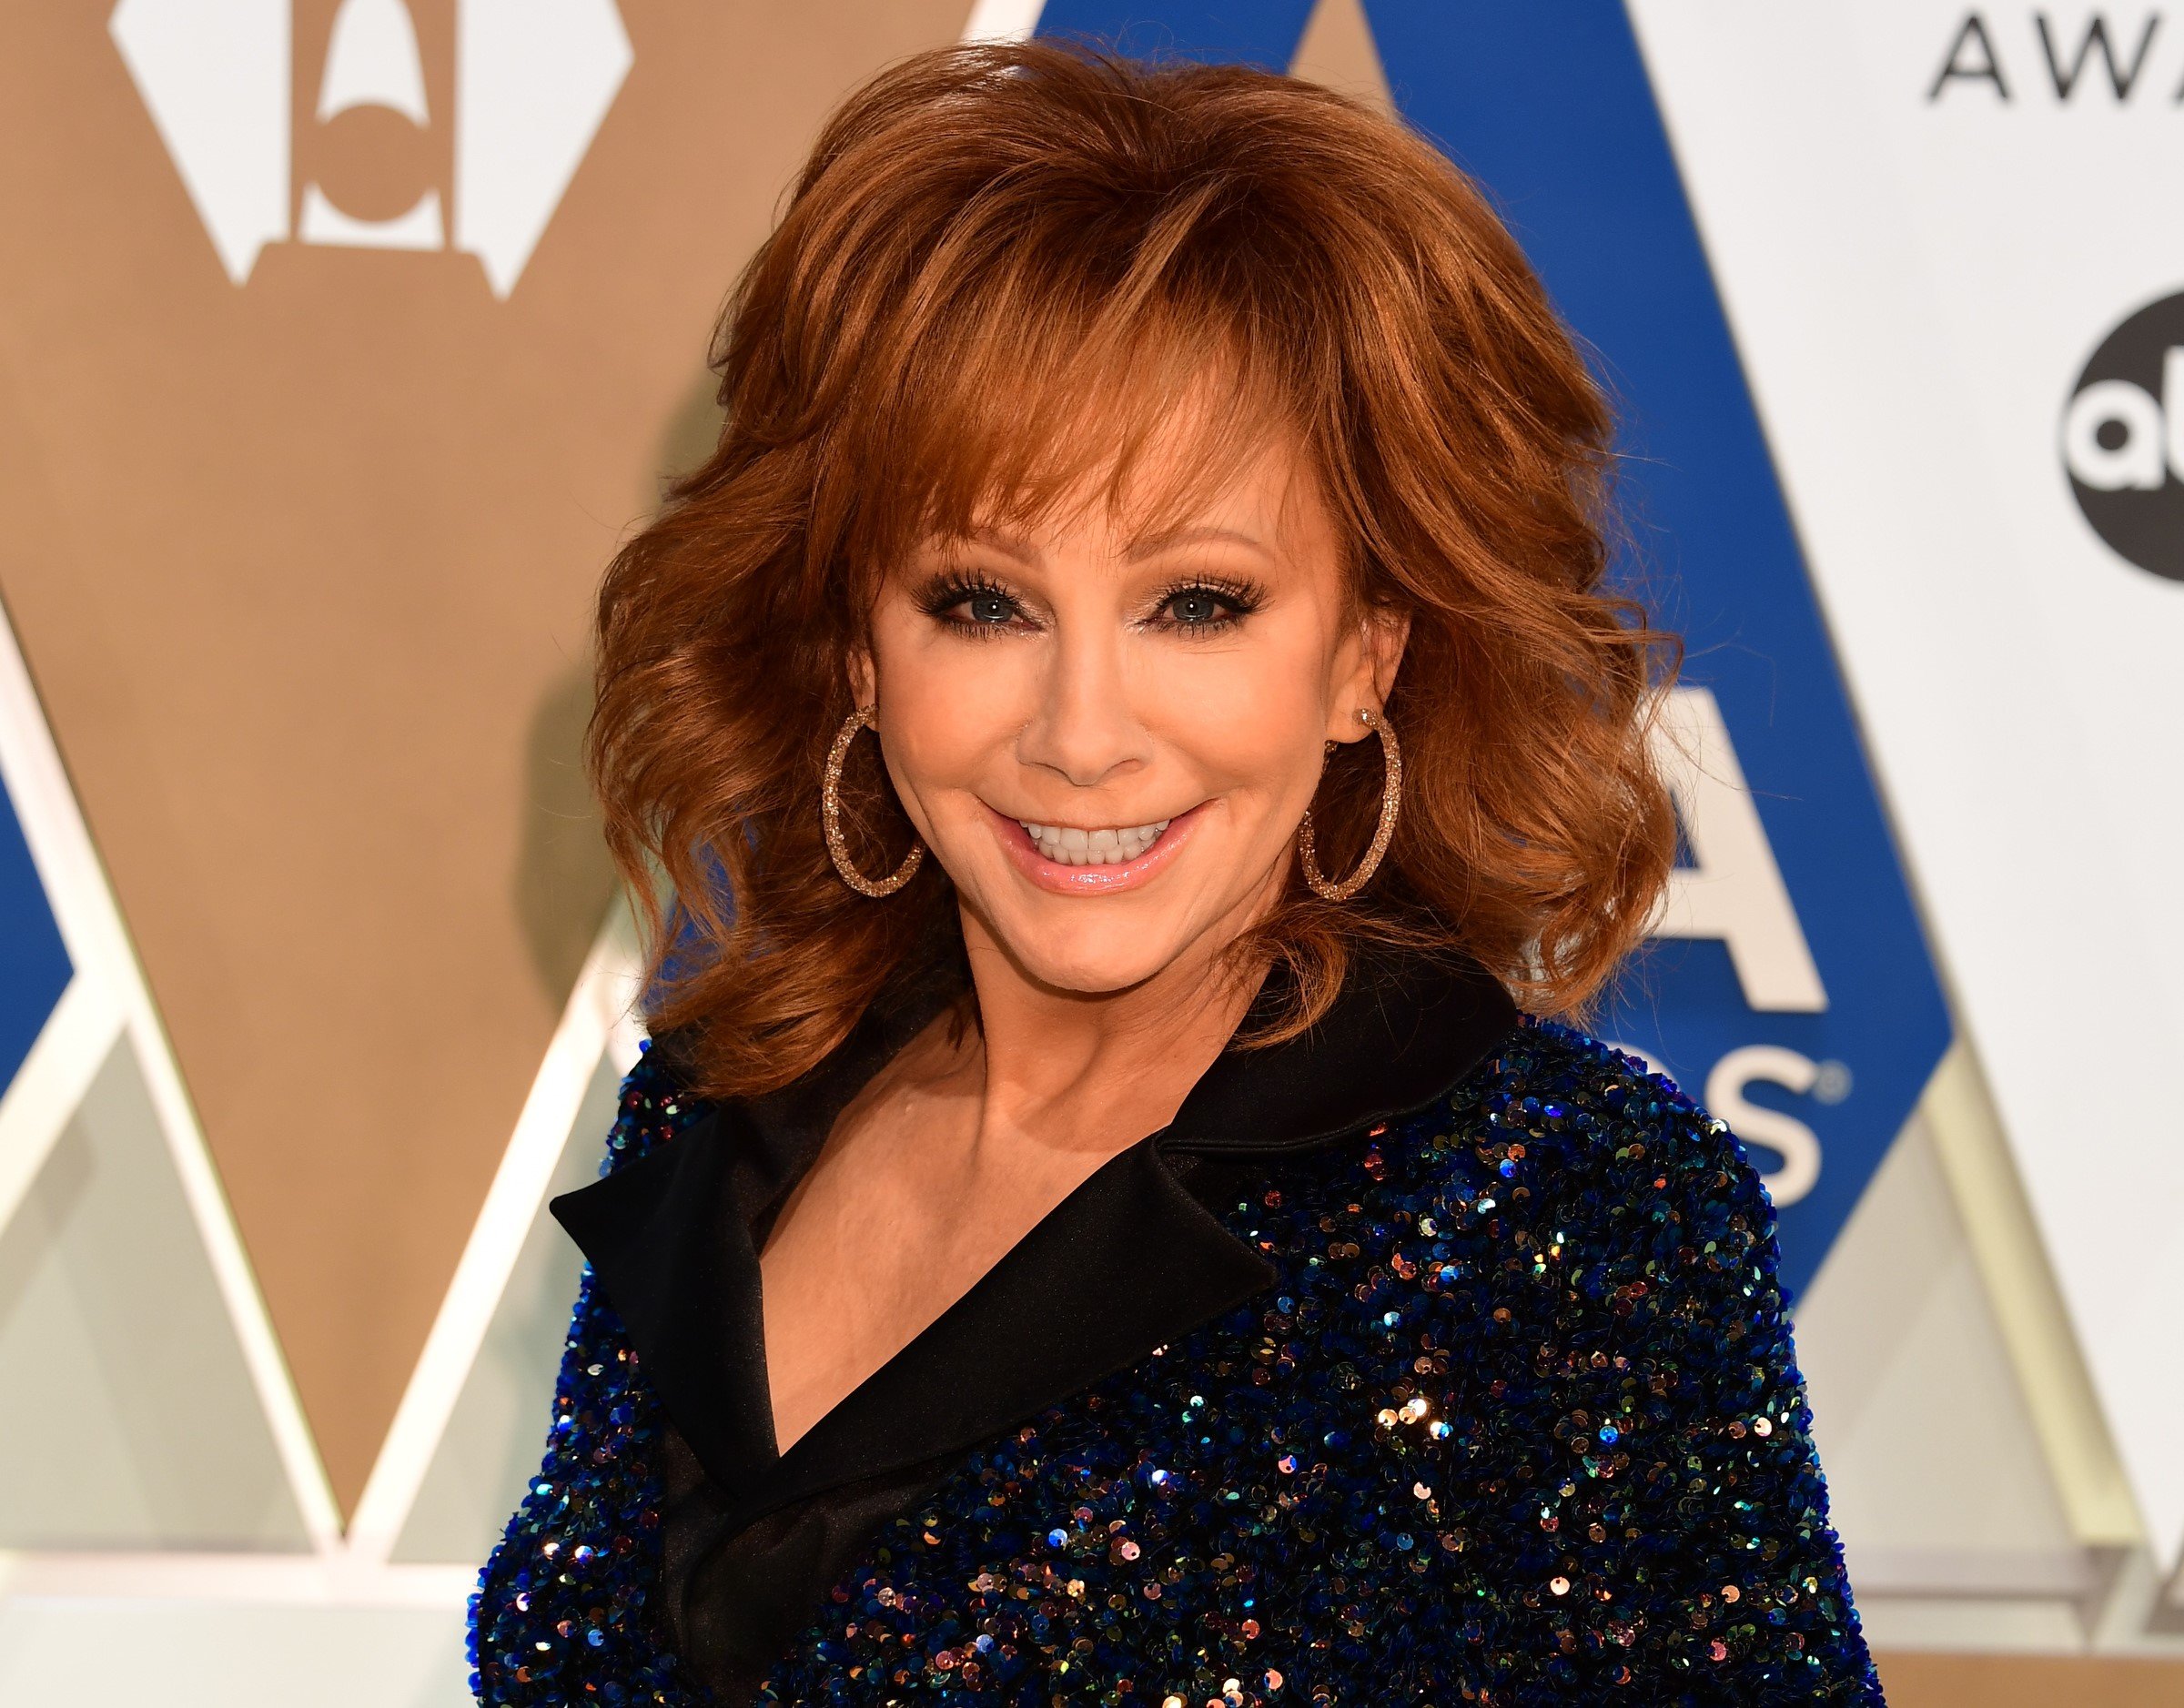 Reba McEntire smiling on the red carpet in a sequins gown at the 54th Annual CMA Awards